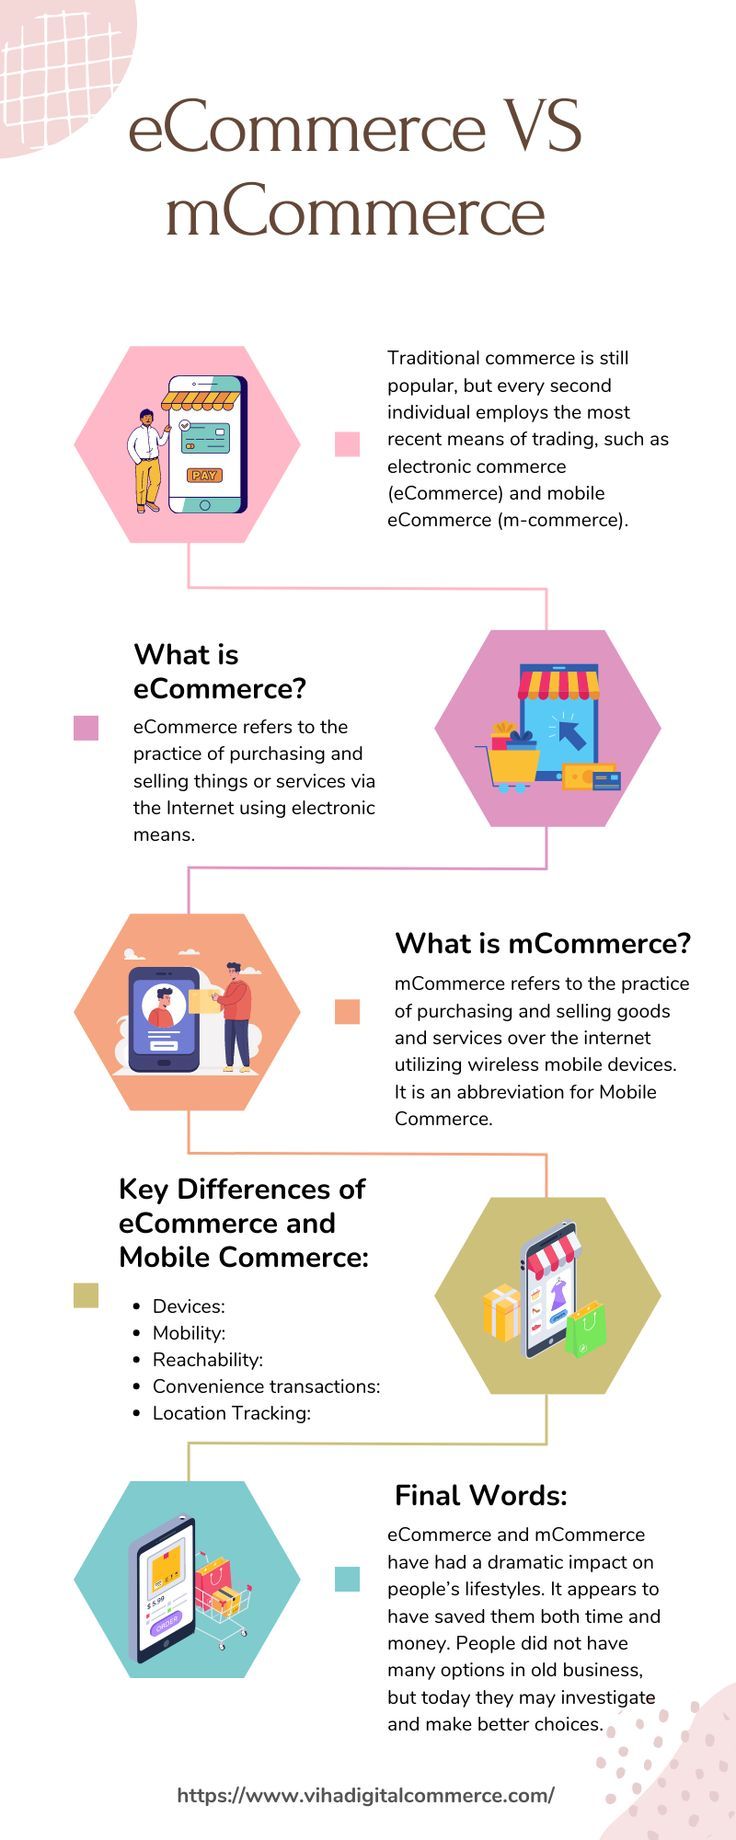 Key Differences of eCommerce and Mobile Commerce